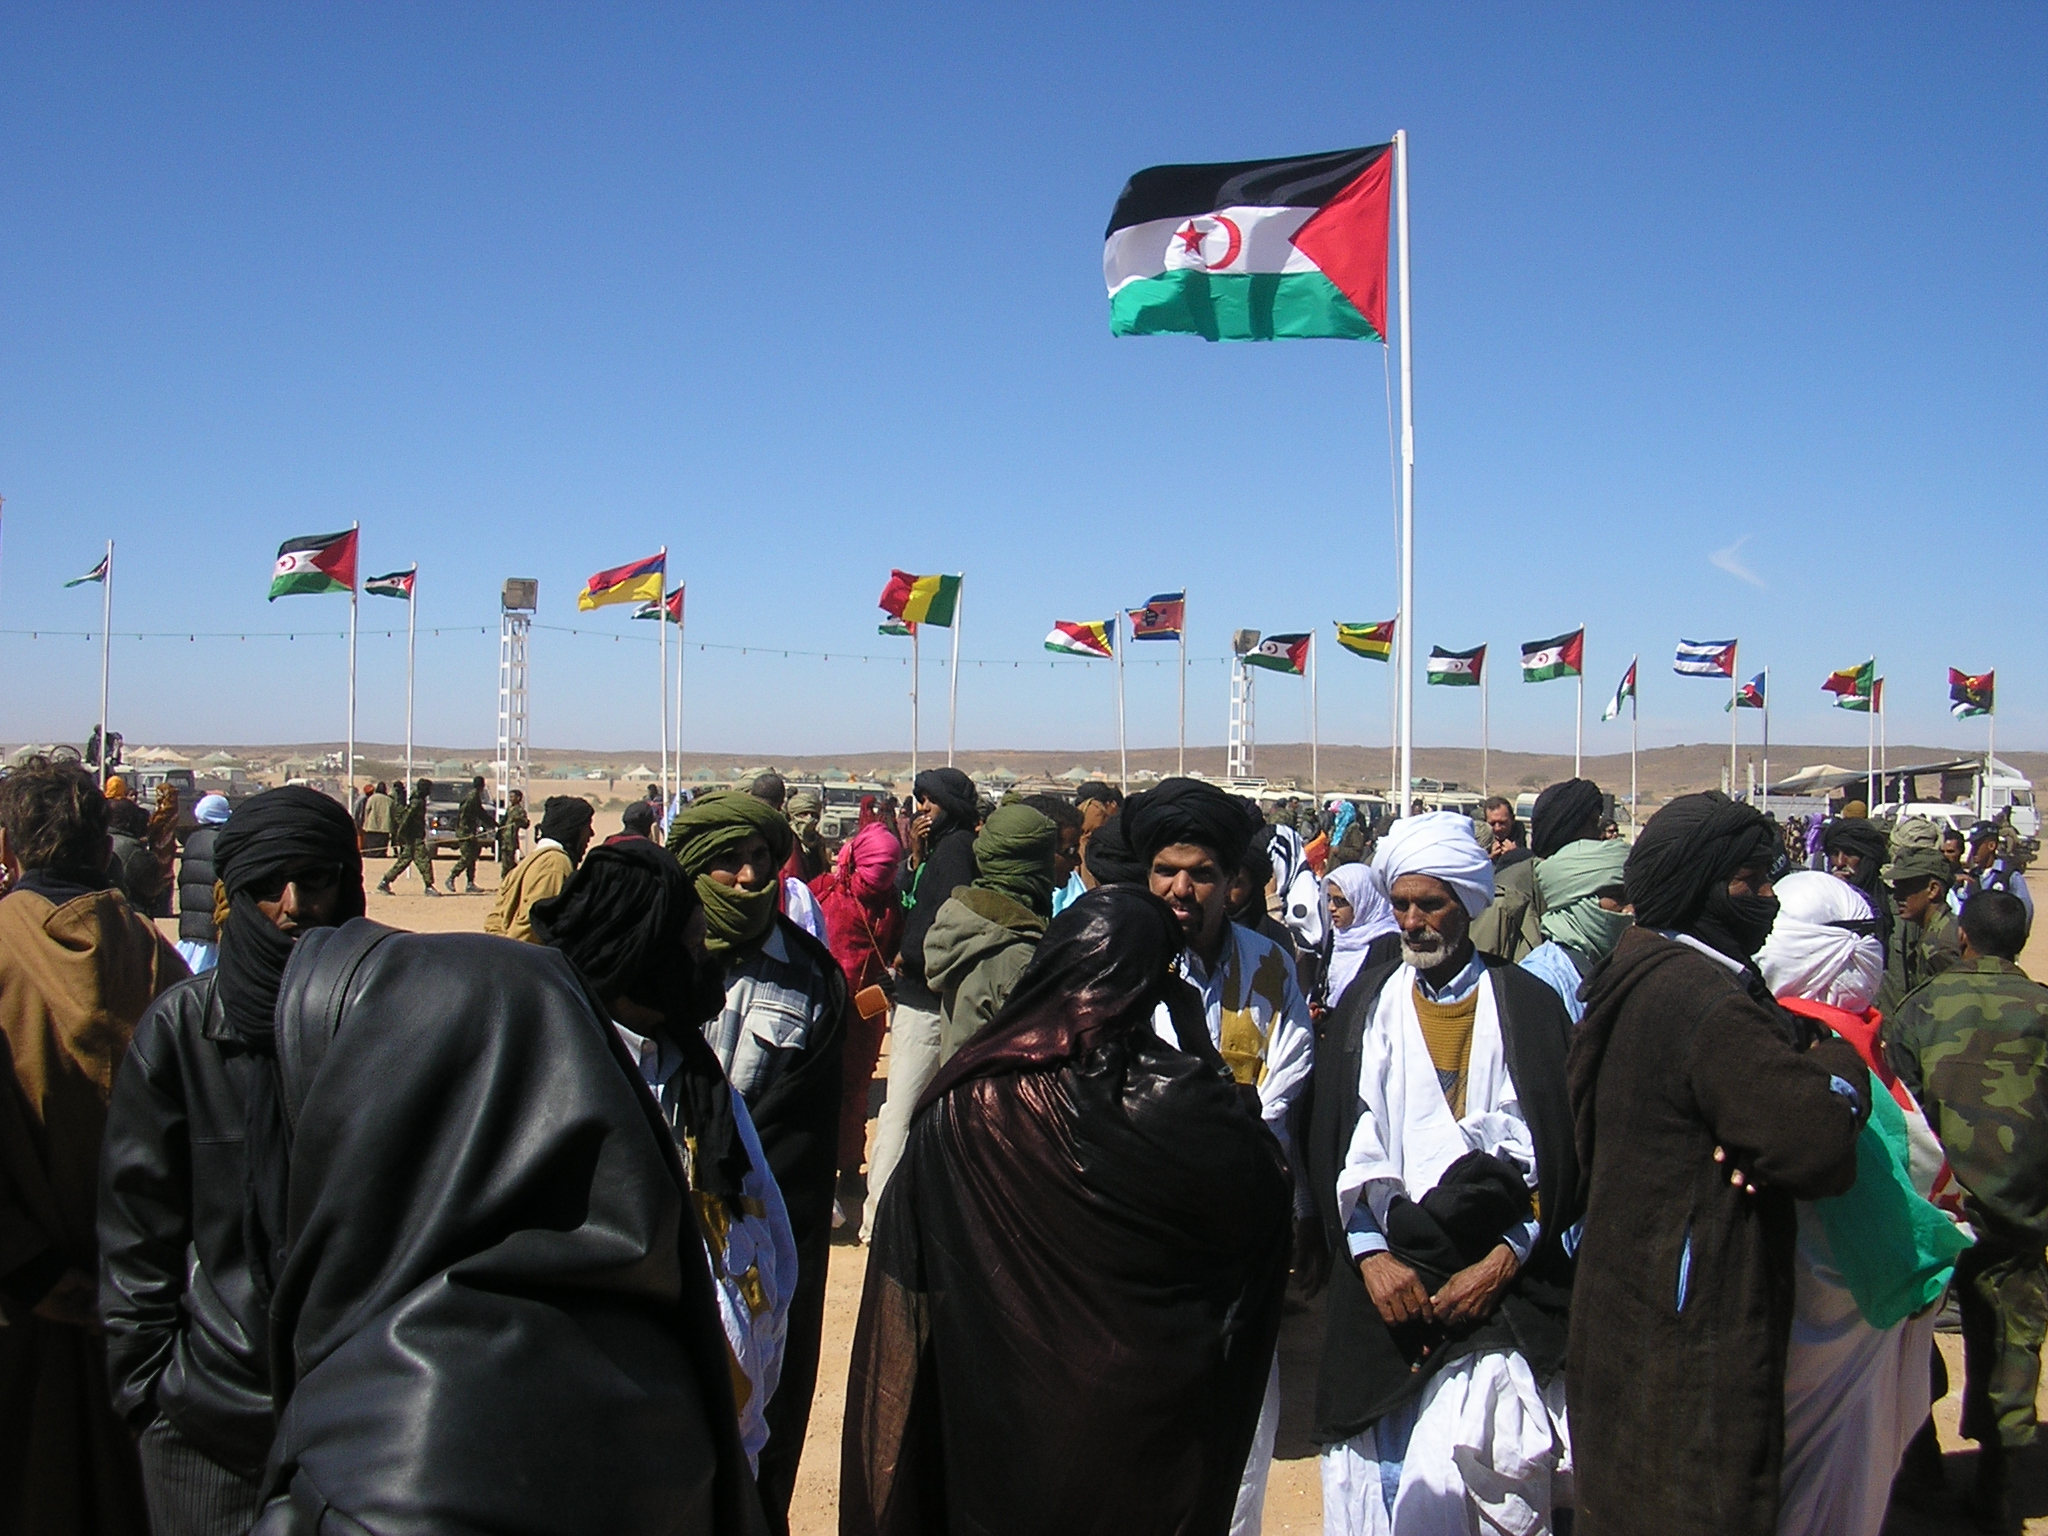 Spain changes its policy on the Western Sahara issue